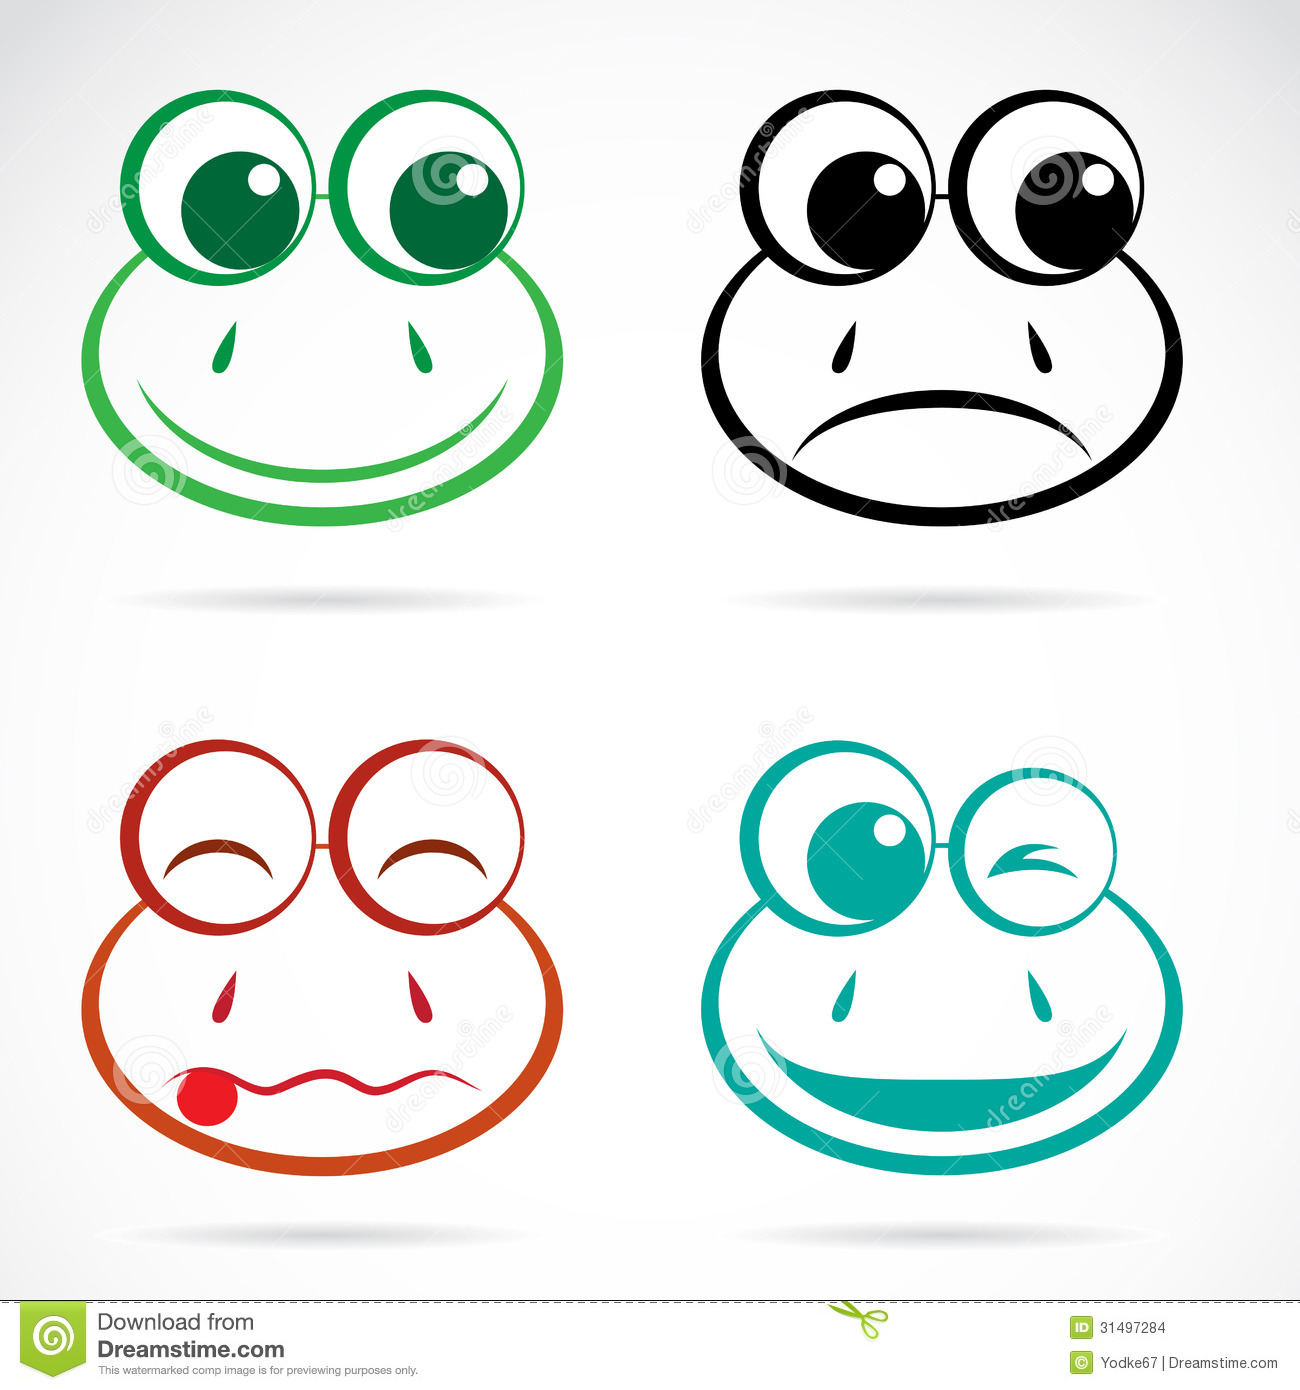 Frog No Background Clipart   Cliparthut   Free Clipart